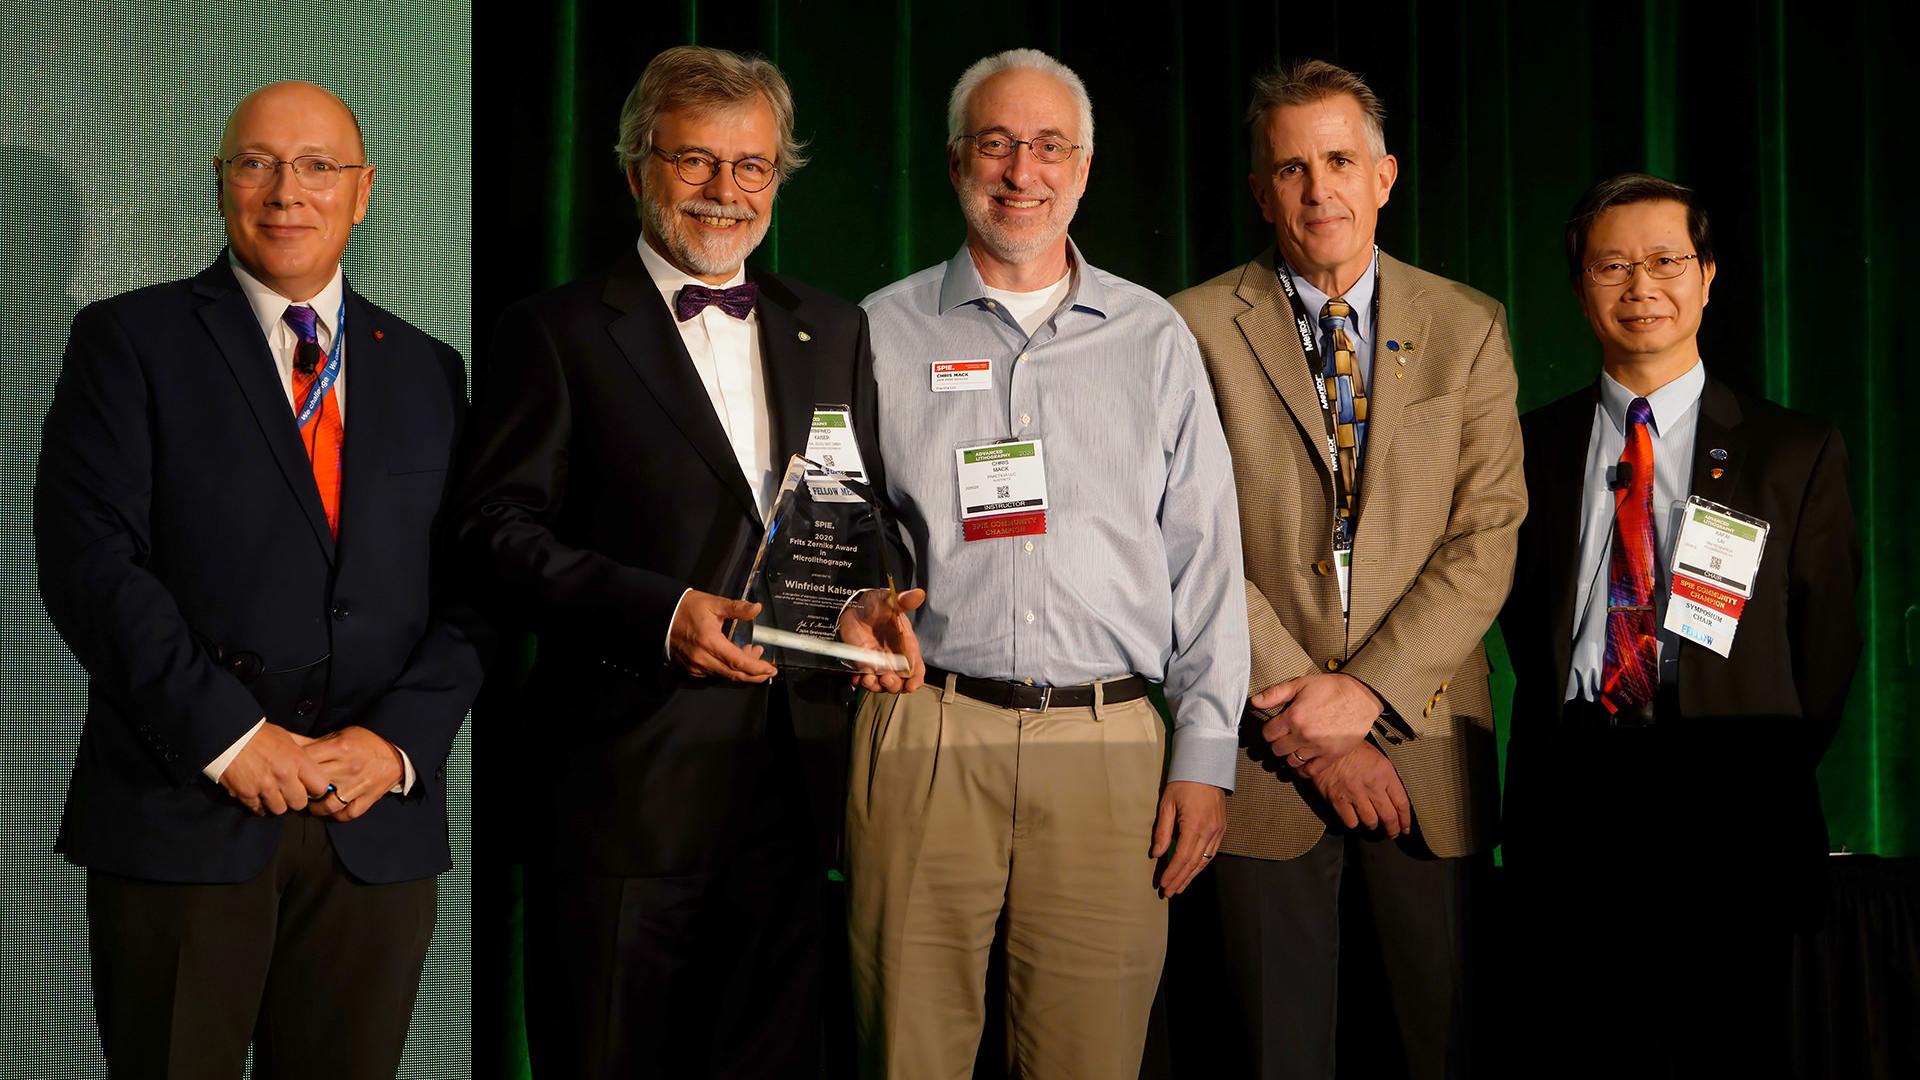 Winfried Kaiser was honored with the SPIE Frits Zernike Award for Microlithography